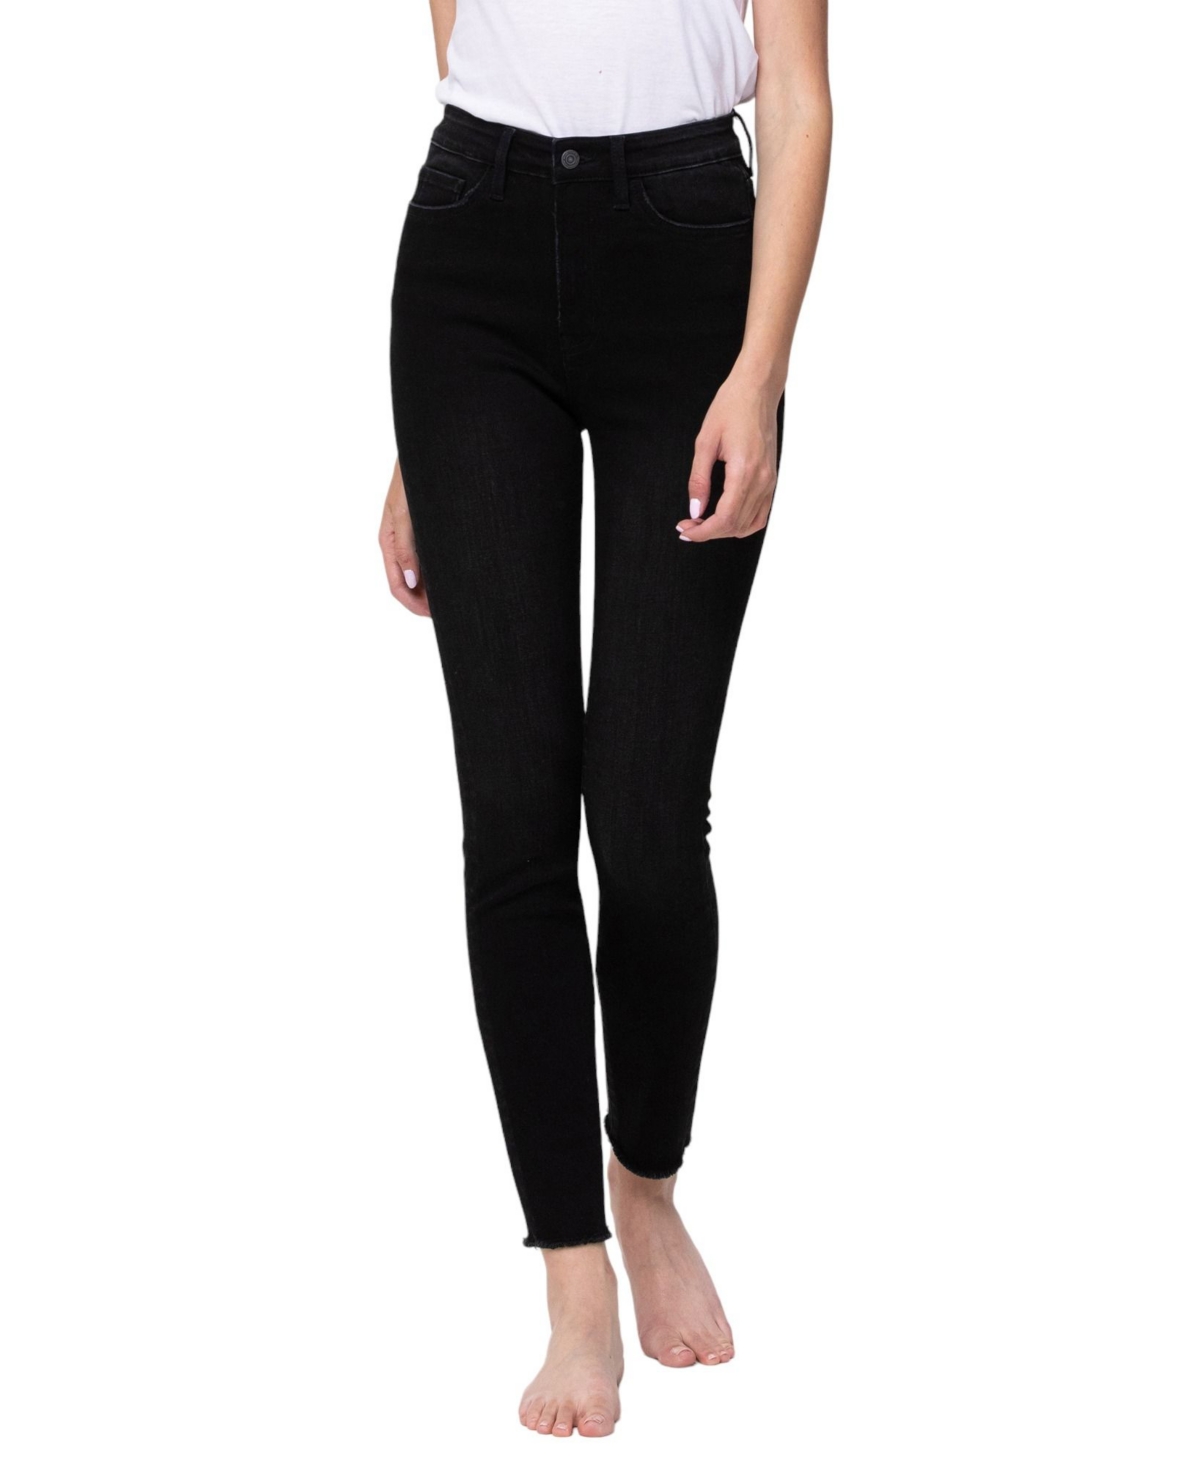 Women's Super High Rise Ankle Skinny Jeans - Washed black